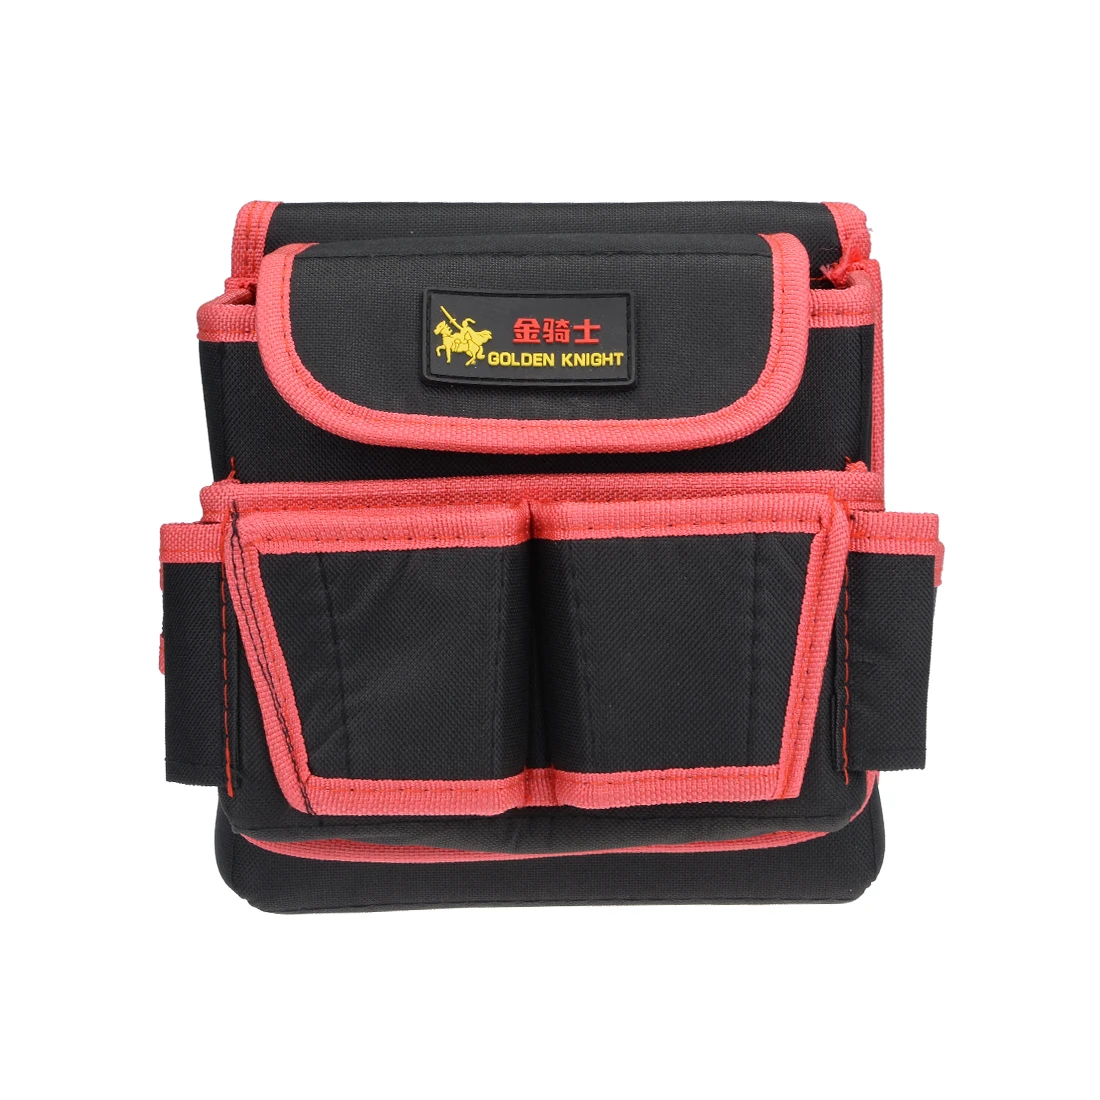 

uxcell Professional Oxford Canvas 3 Tool Pockets, Fully Adjustable Waterproof & Protective Work Belt Red